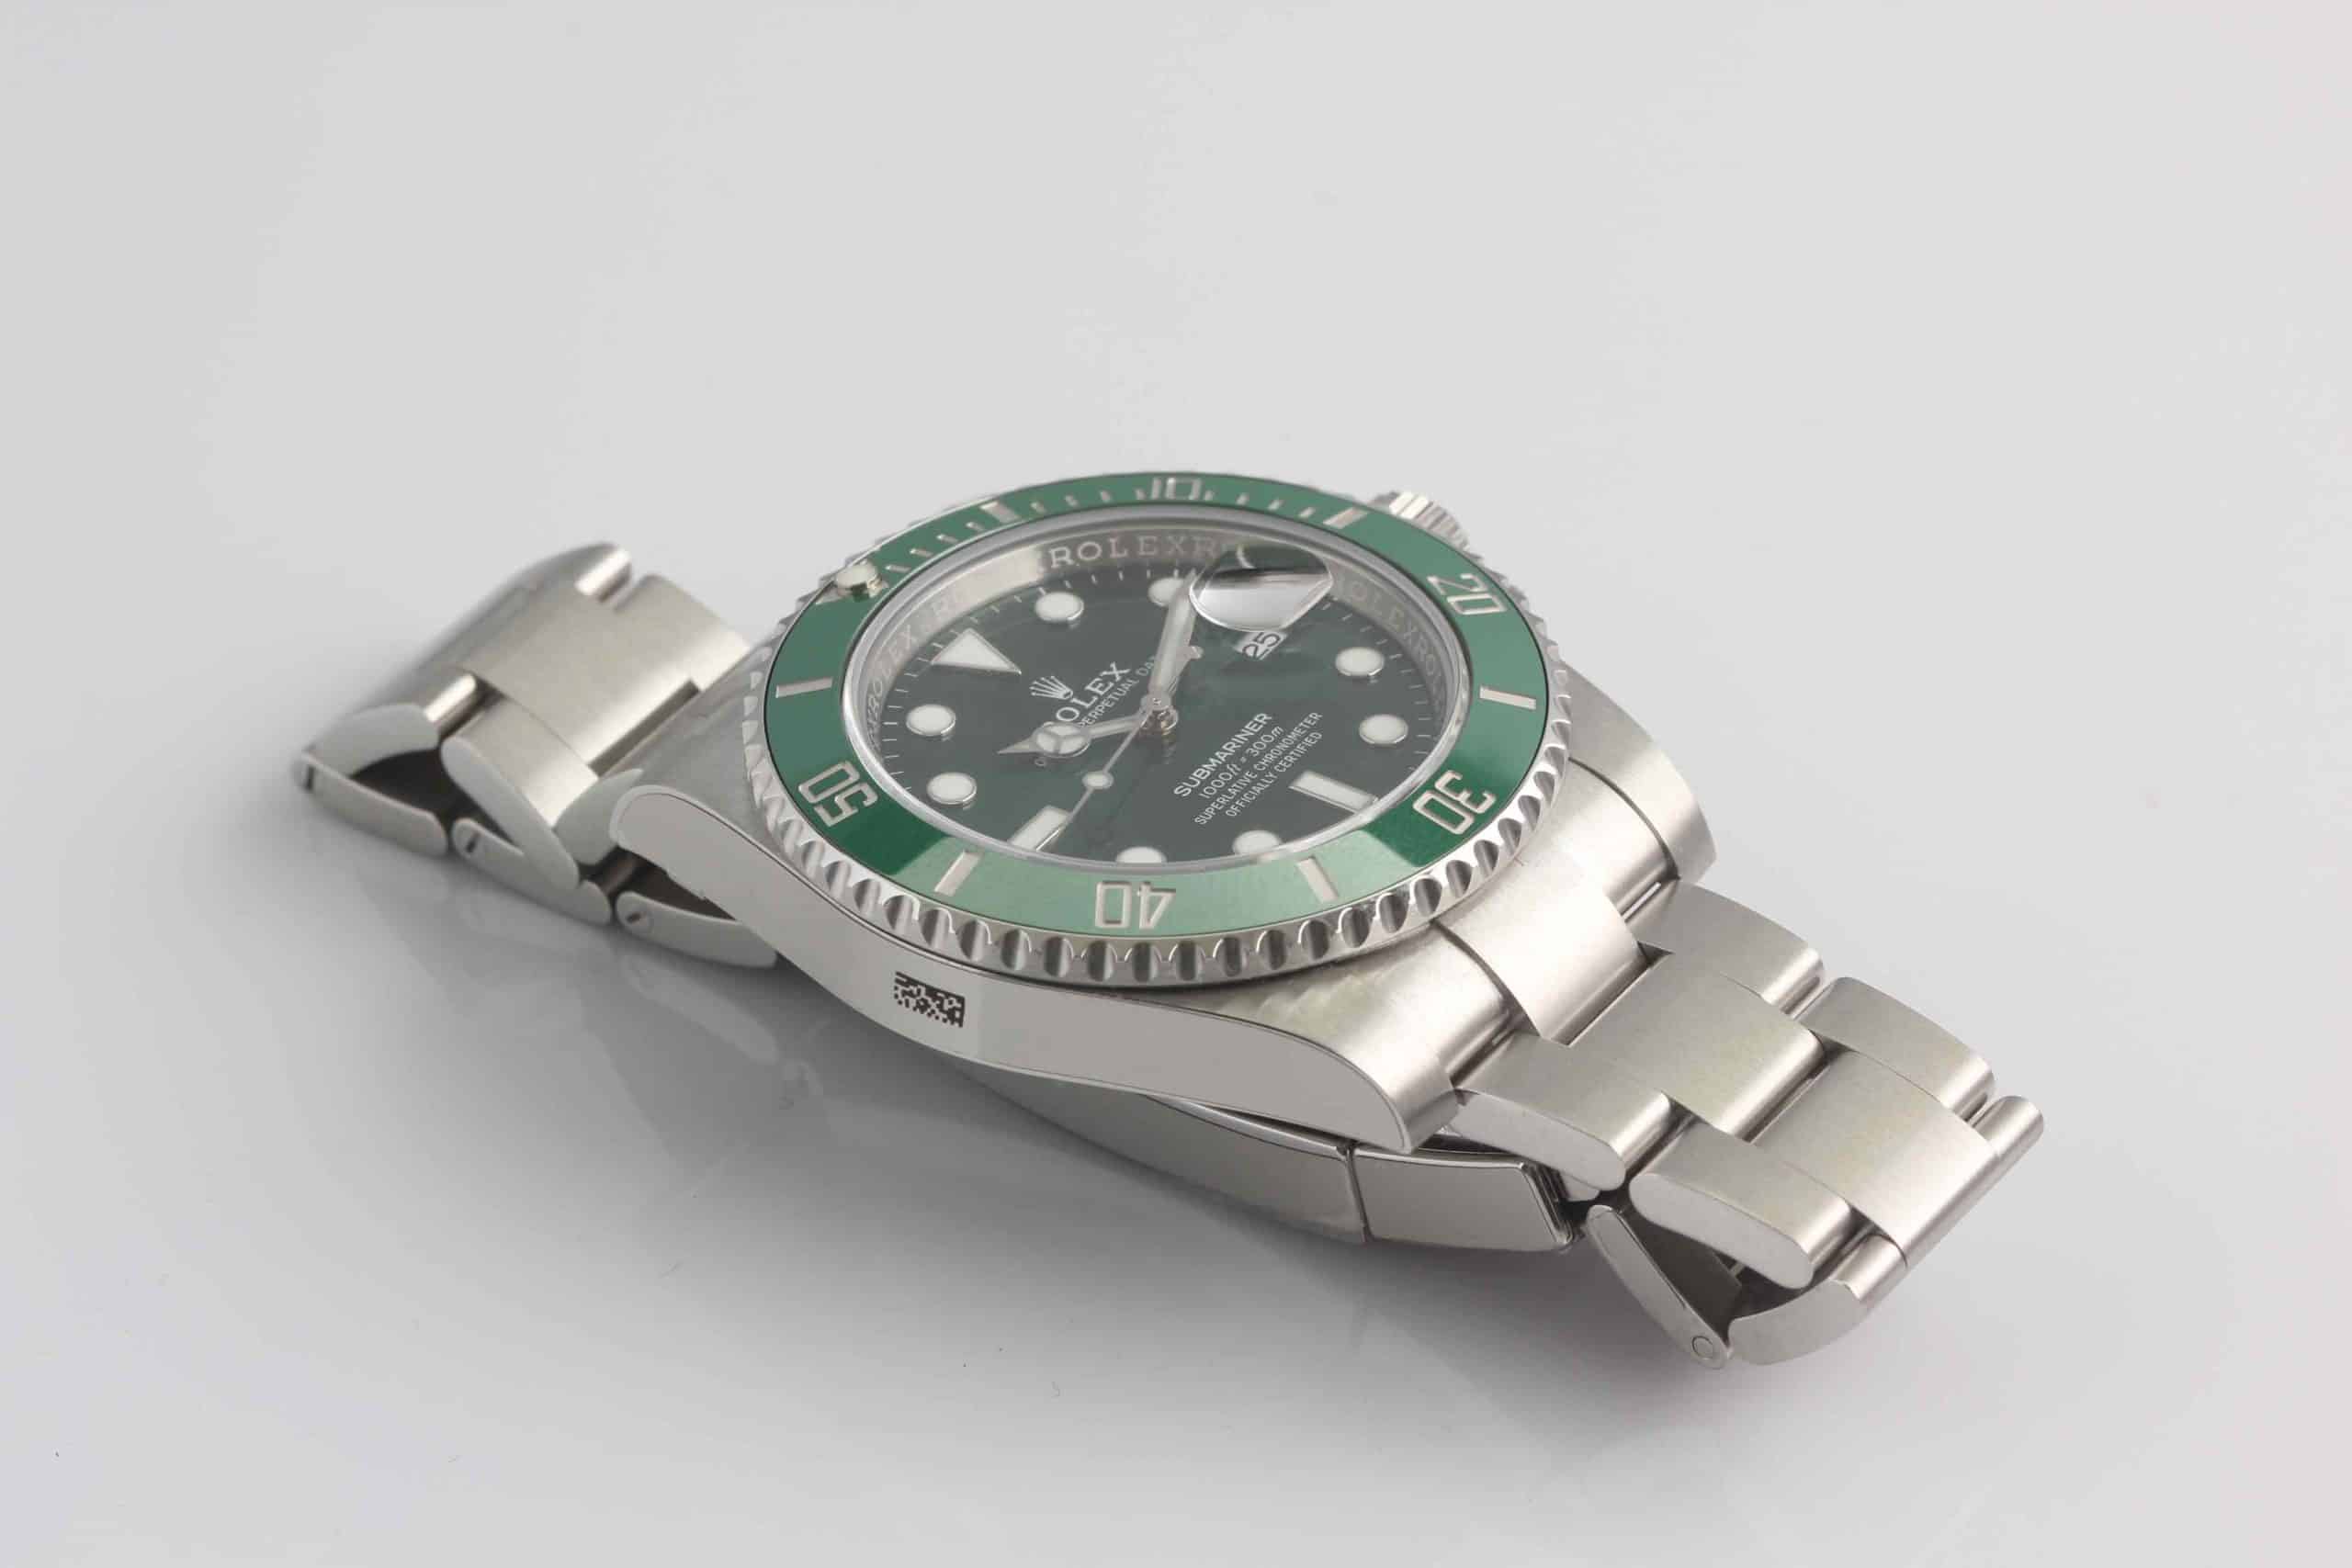 Submariner "HULK" Reference NEW!! - SOLD - Watch Seller